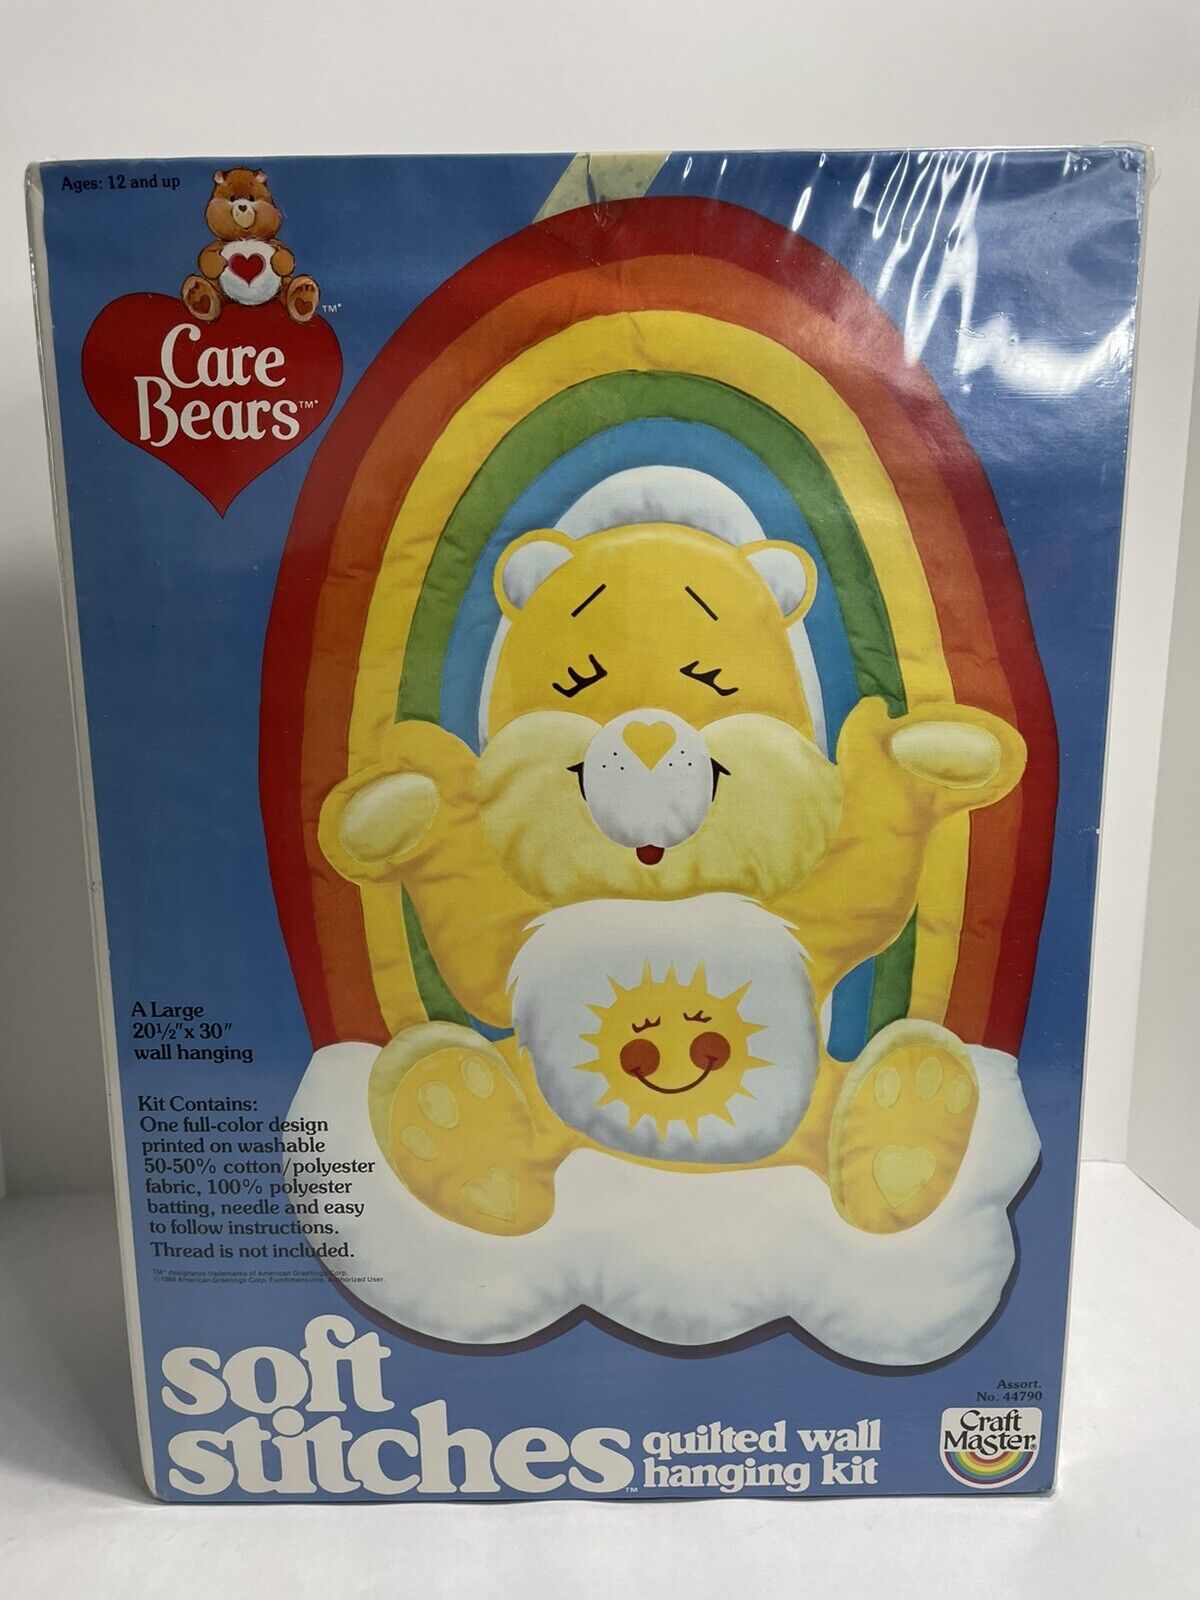 Vintage Care Bears Soft Stitches 1984 Quilted Wall Hanging Kit Craft Masters